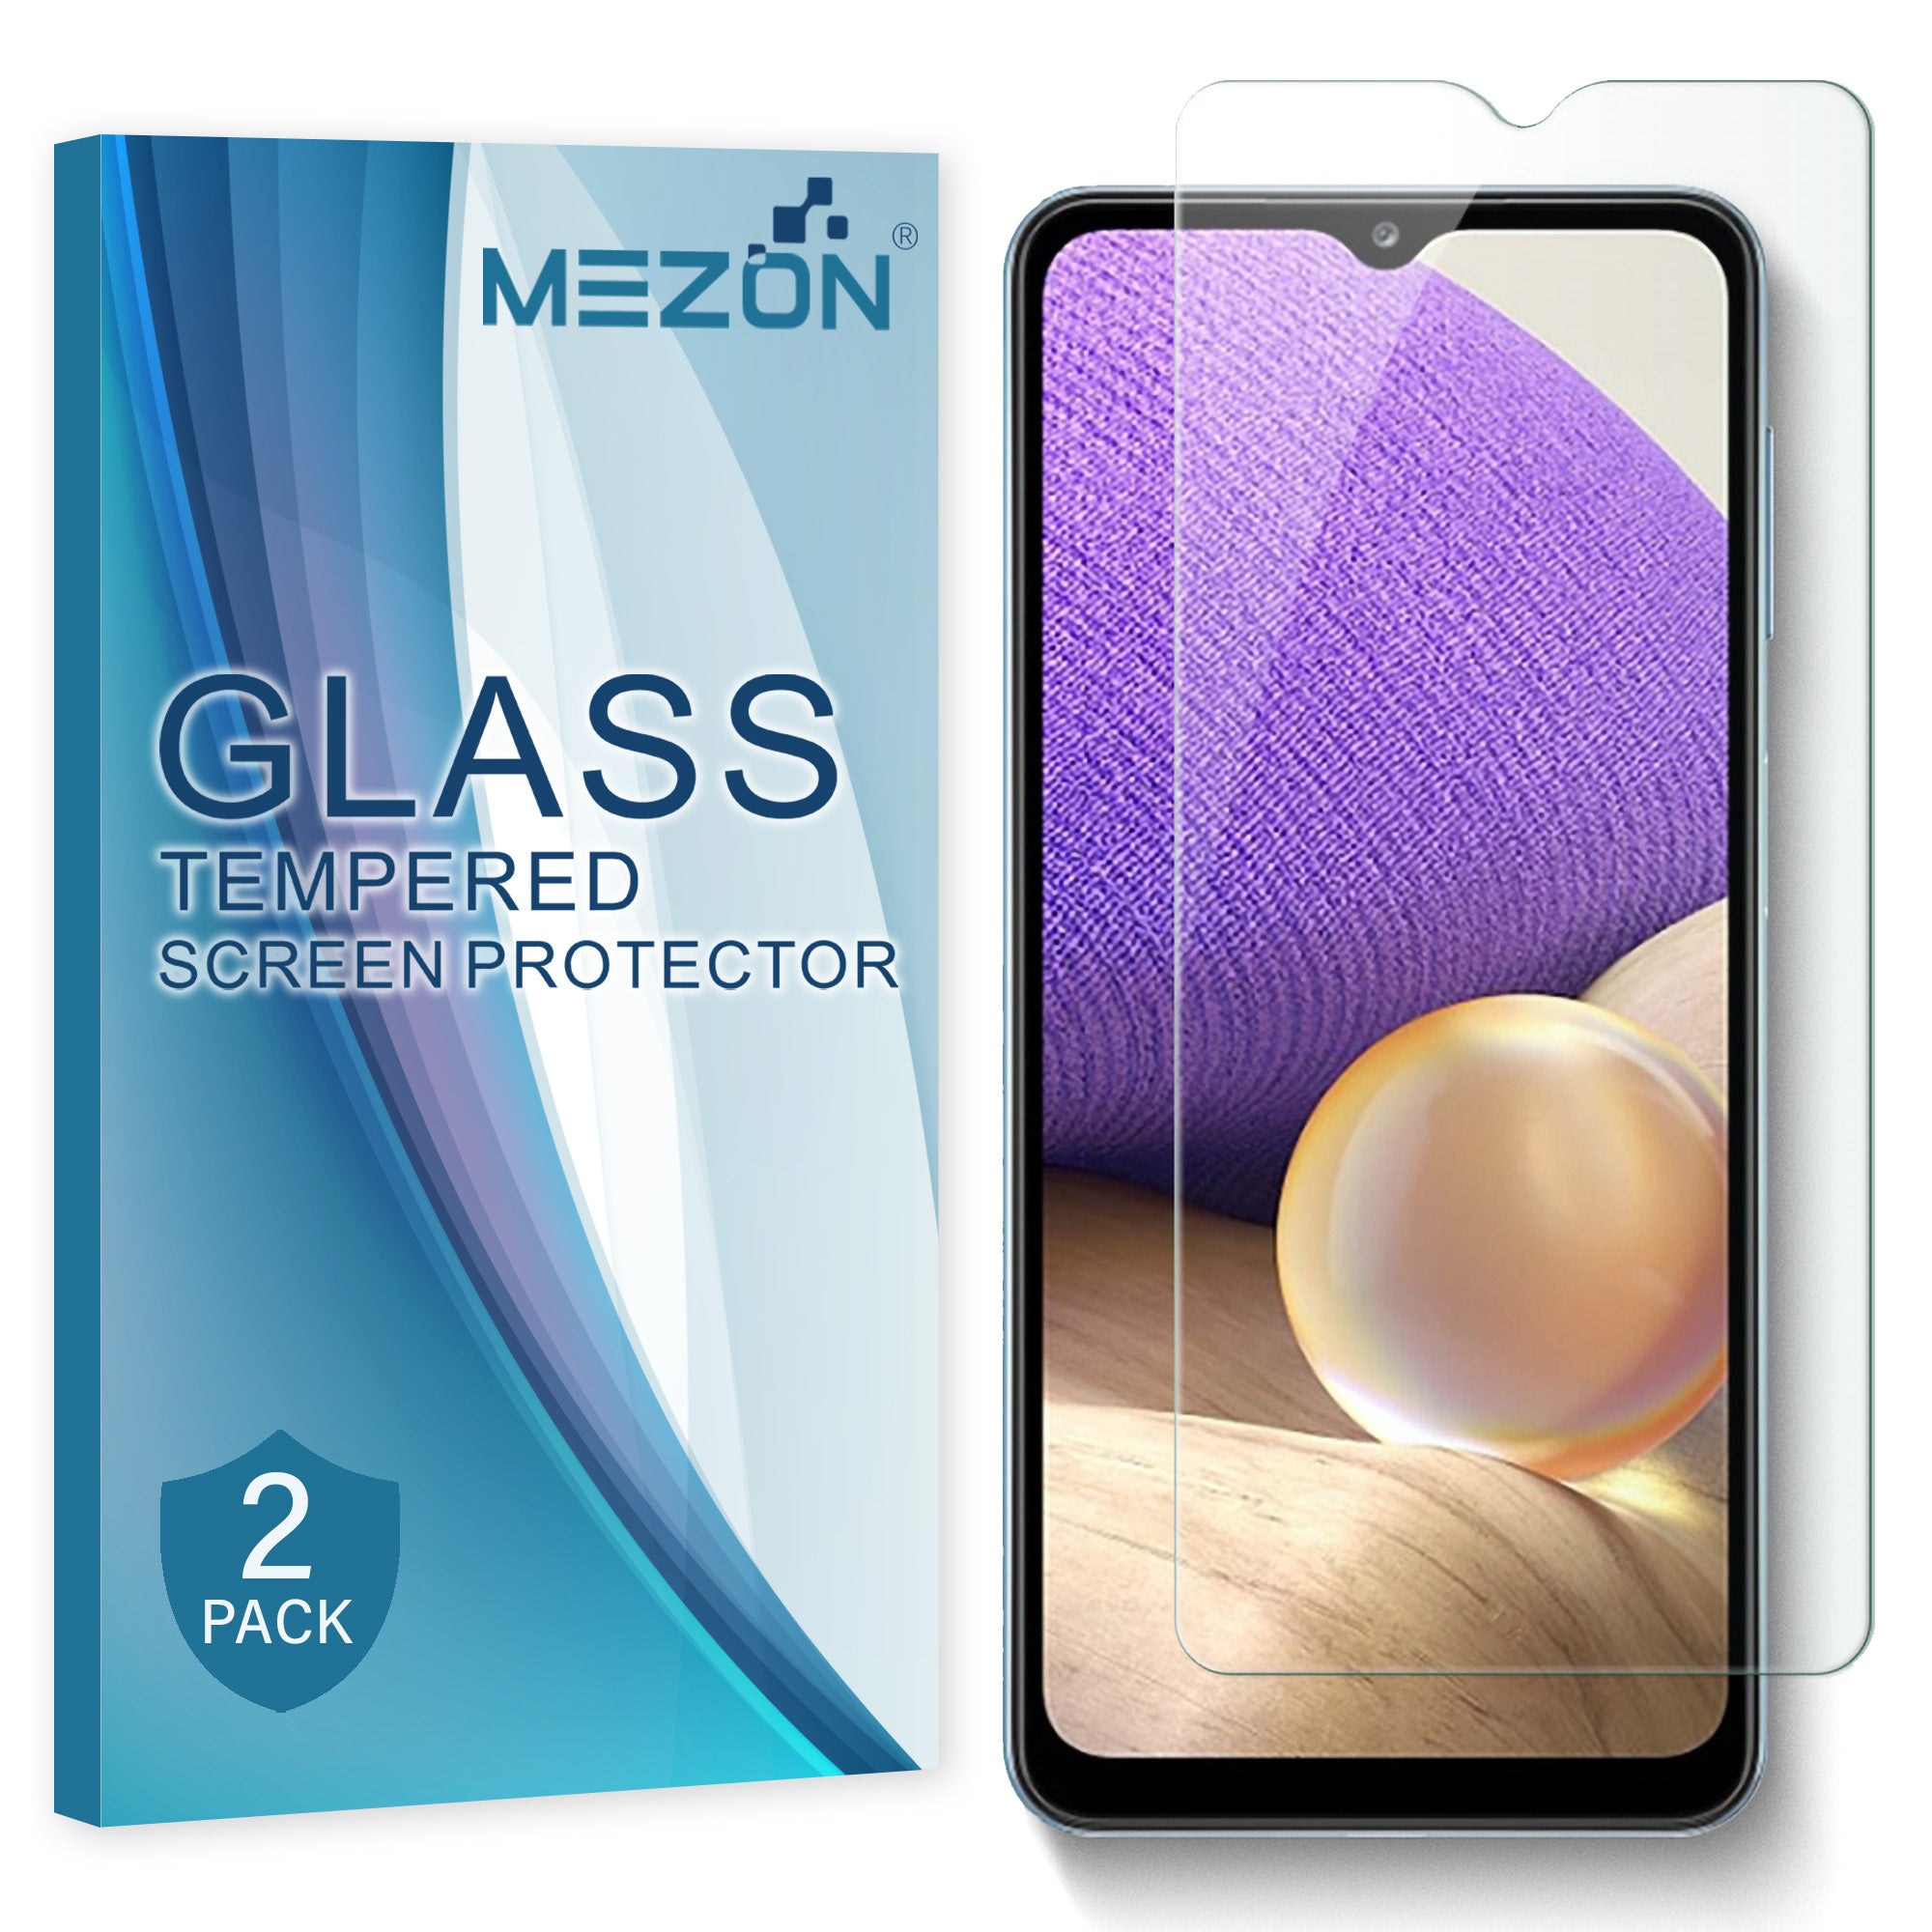 [2 Pack] Samsung Galaxy A32 5G Tempered Glass Crystal Clear Premium 9H HD Screen Protector by MEZON – Case Friendly, Shock Absorption (A32 5G, 9H)